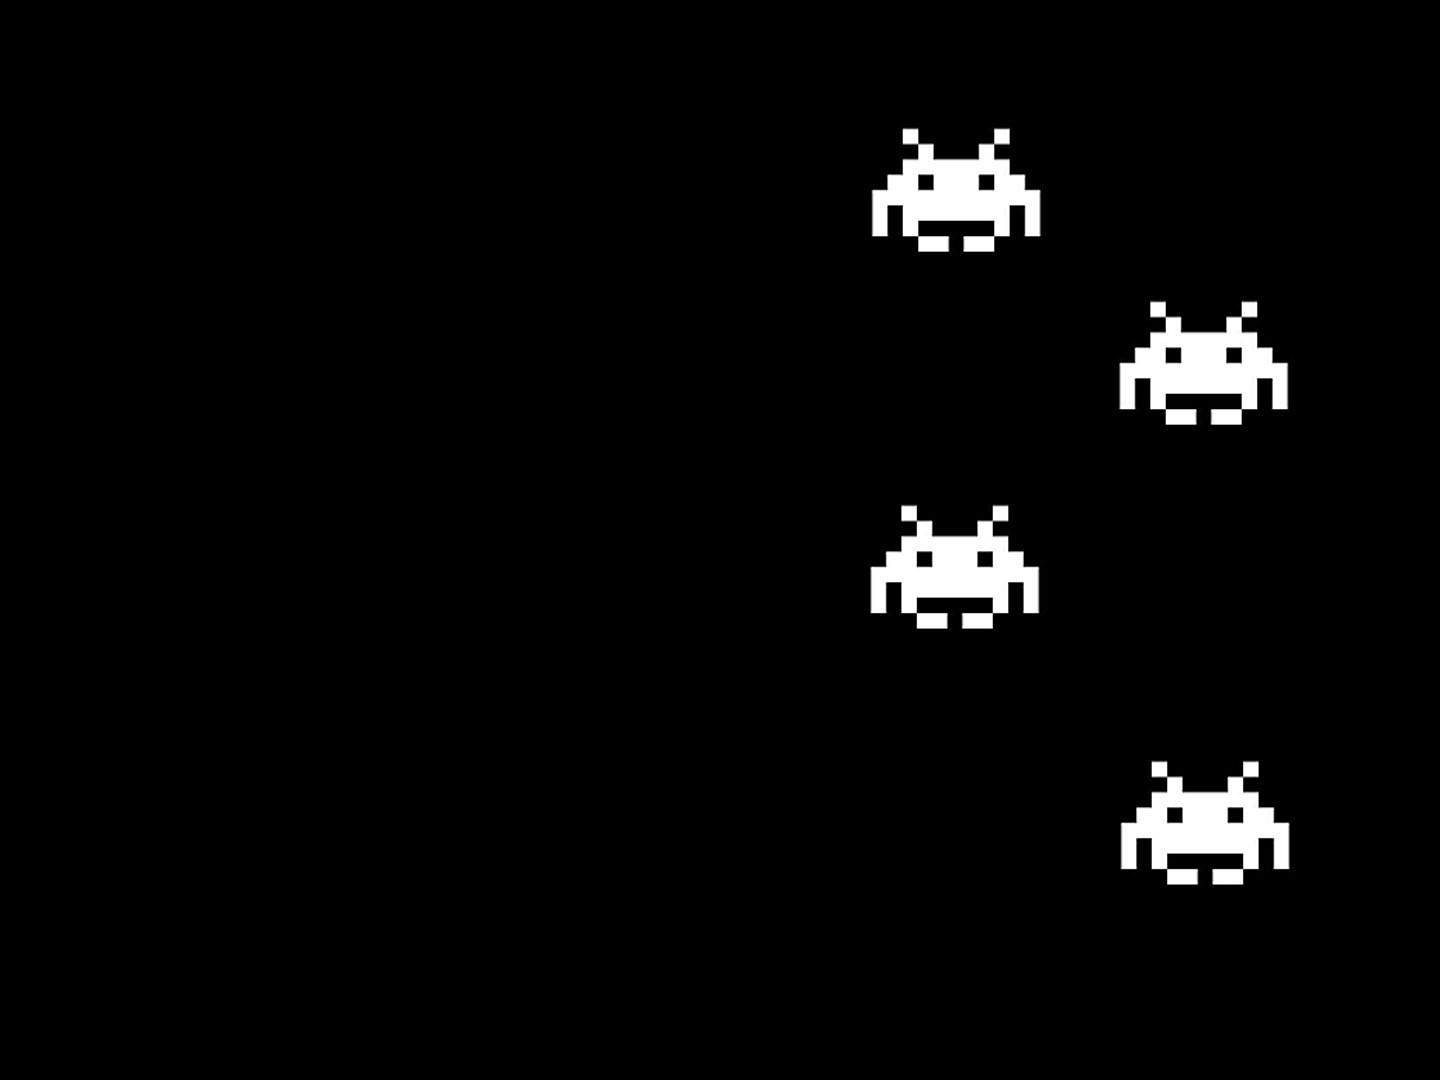 Space Invaders Action Games Wallpaper Image Featuring Classic